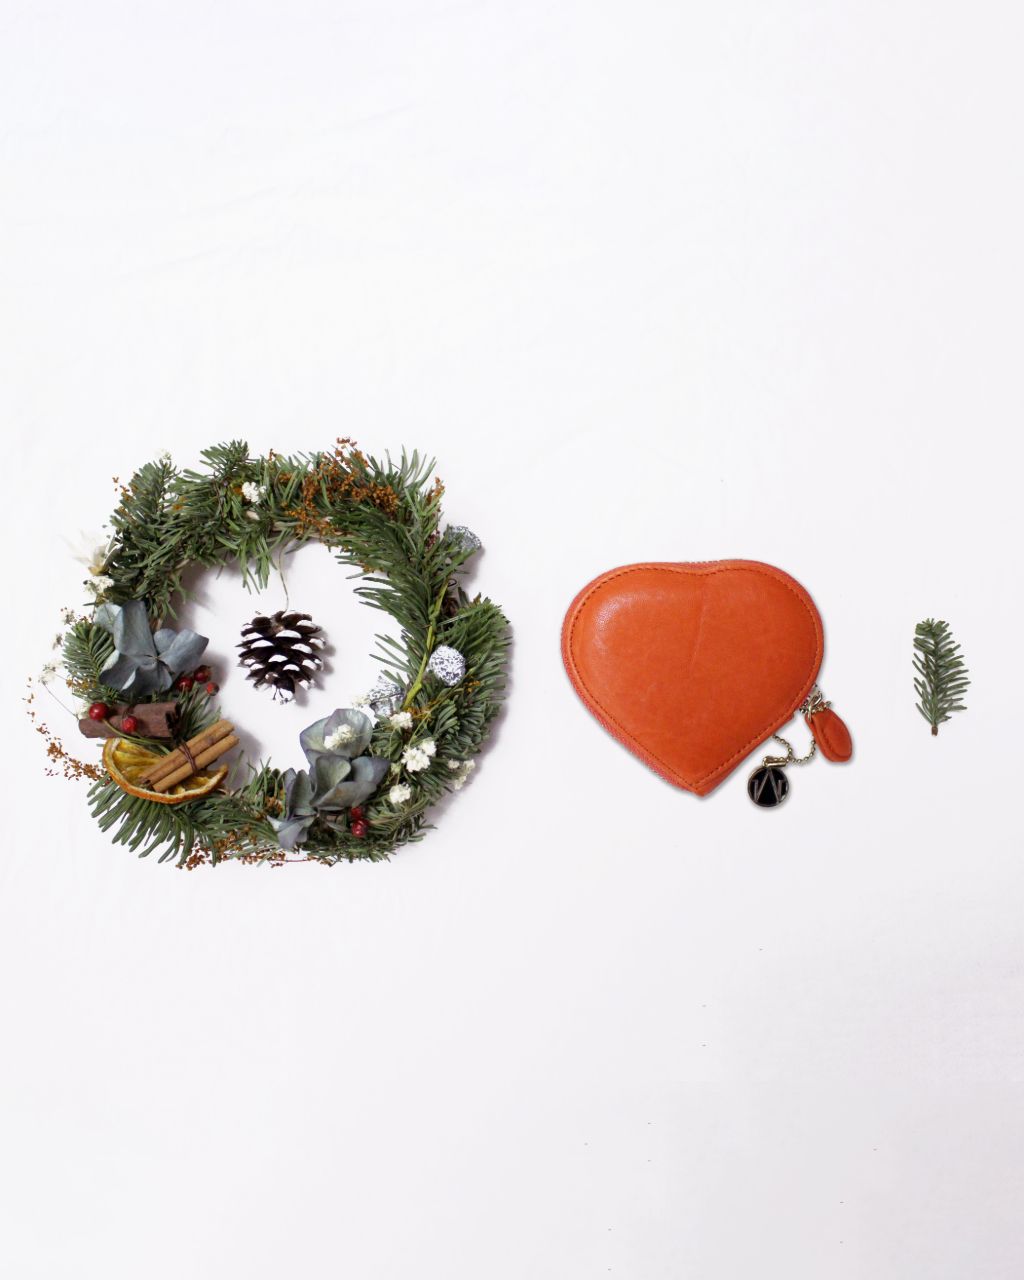 Christmas ring, heart shape coins purse in Orange